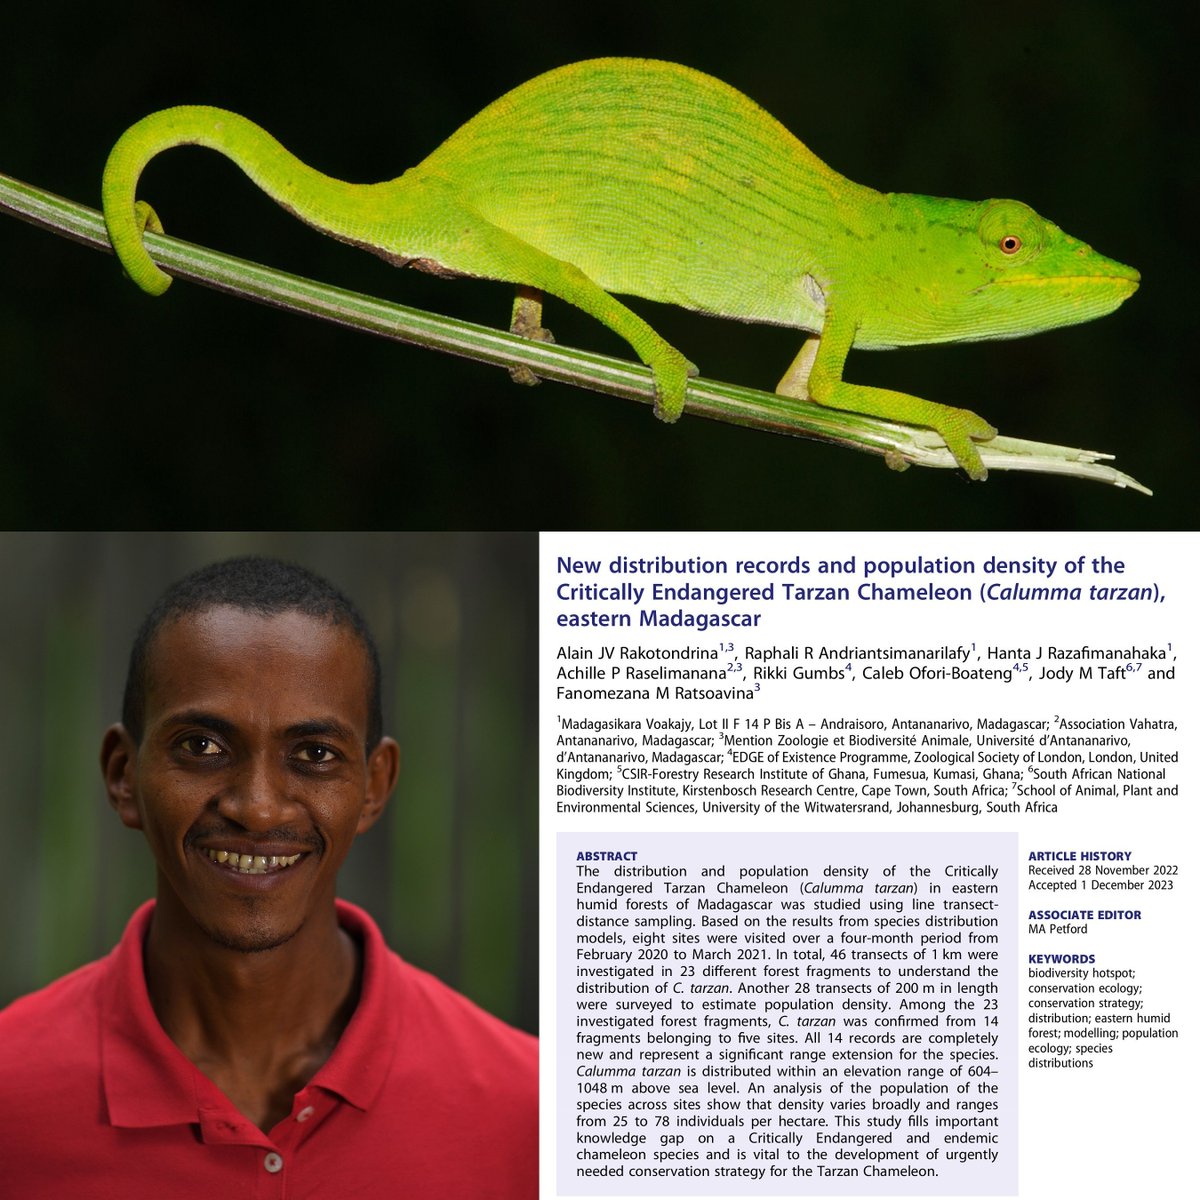 A huge congratulations to Alain Rakotondrina and team on the publication of research from his EDGE Fellowship! This important research will inform the long-term conservation of the Critically Endangered Tarzan Chameleon! Head to buff.ly/3VbB6kj to read the full paper.